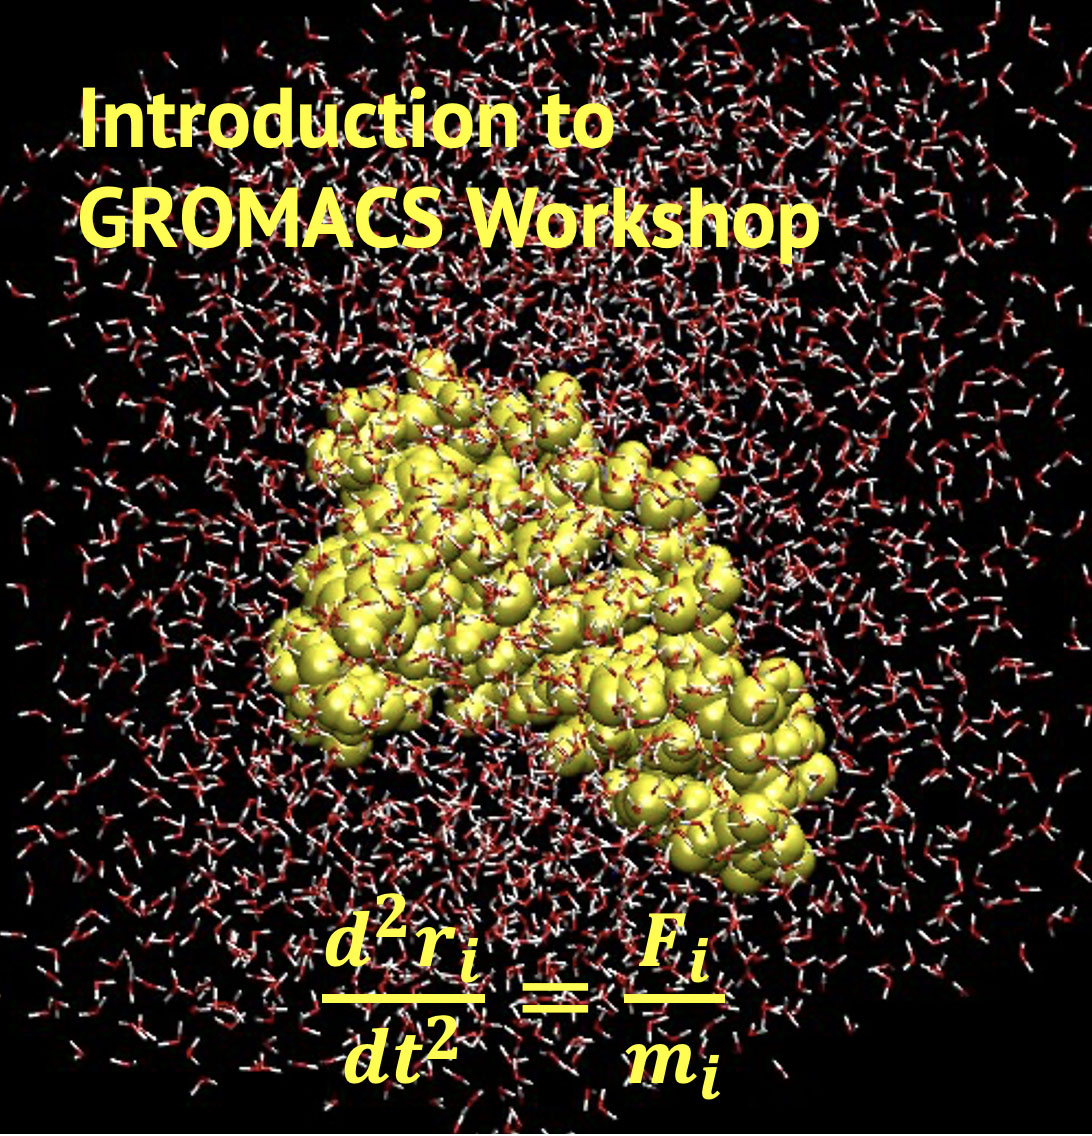 image of a biomolecular simulation as advertising for the Introduction to GROMACS Workshop 